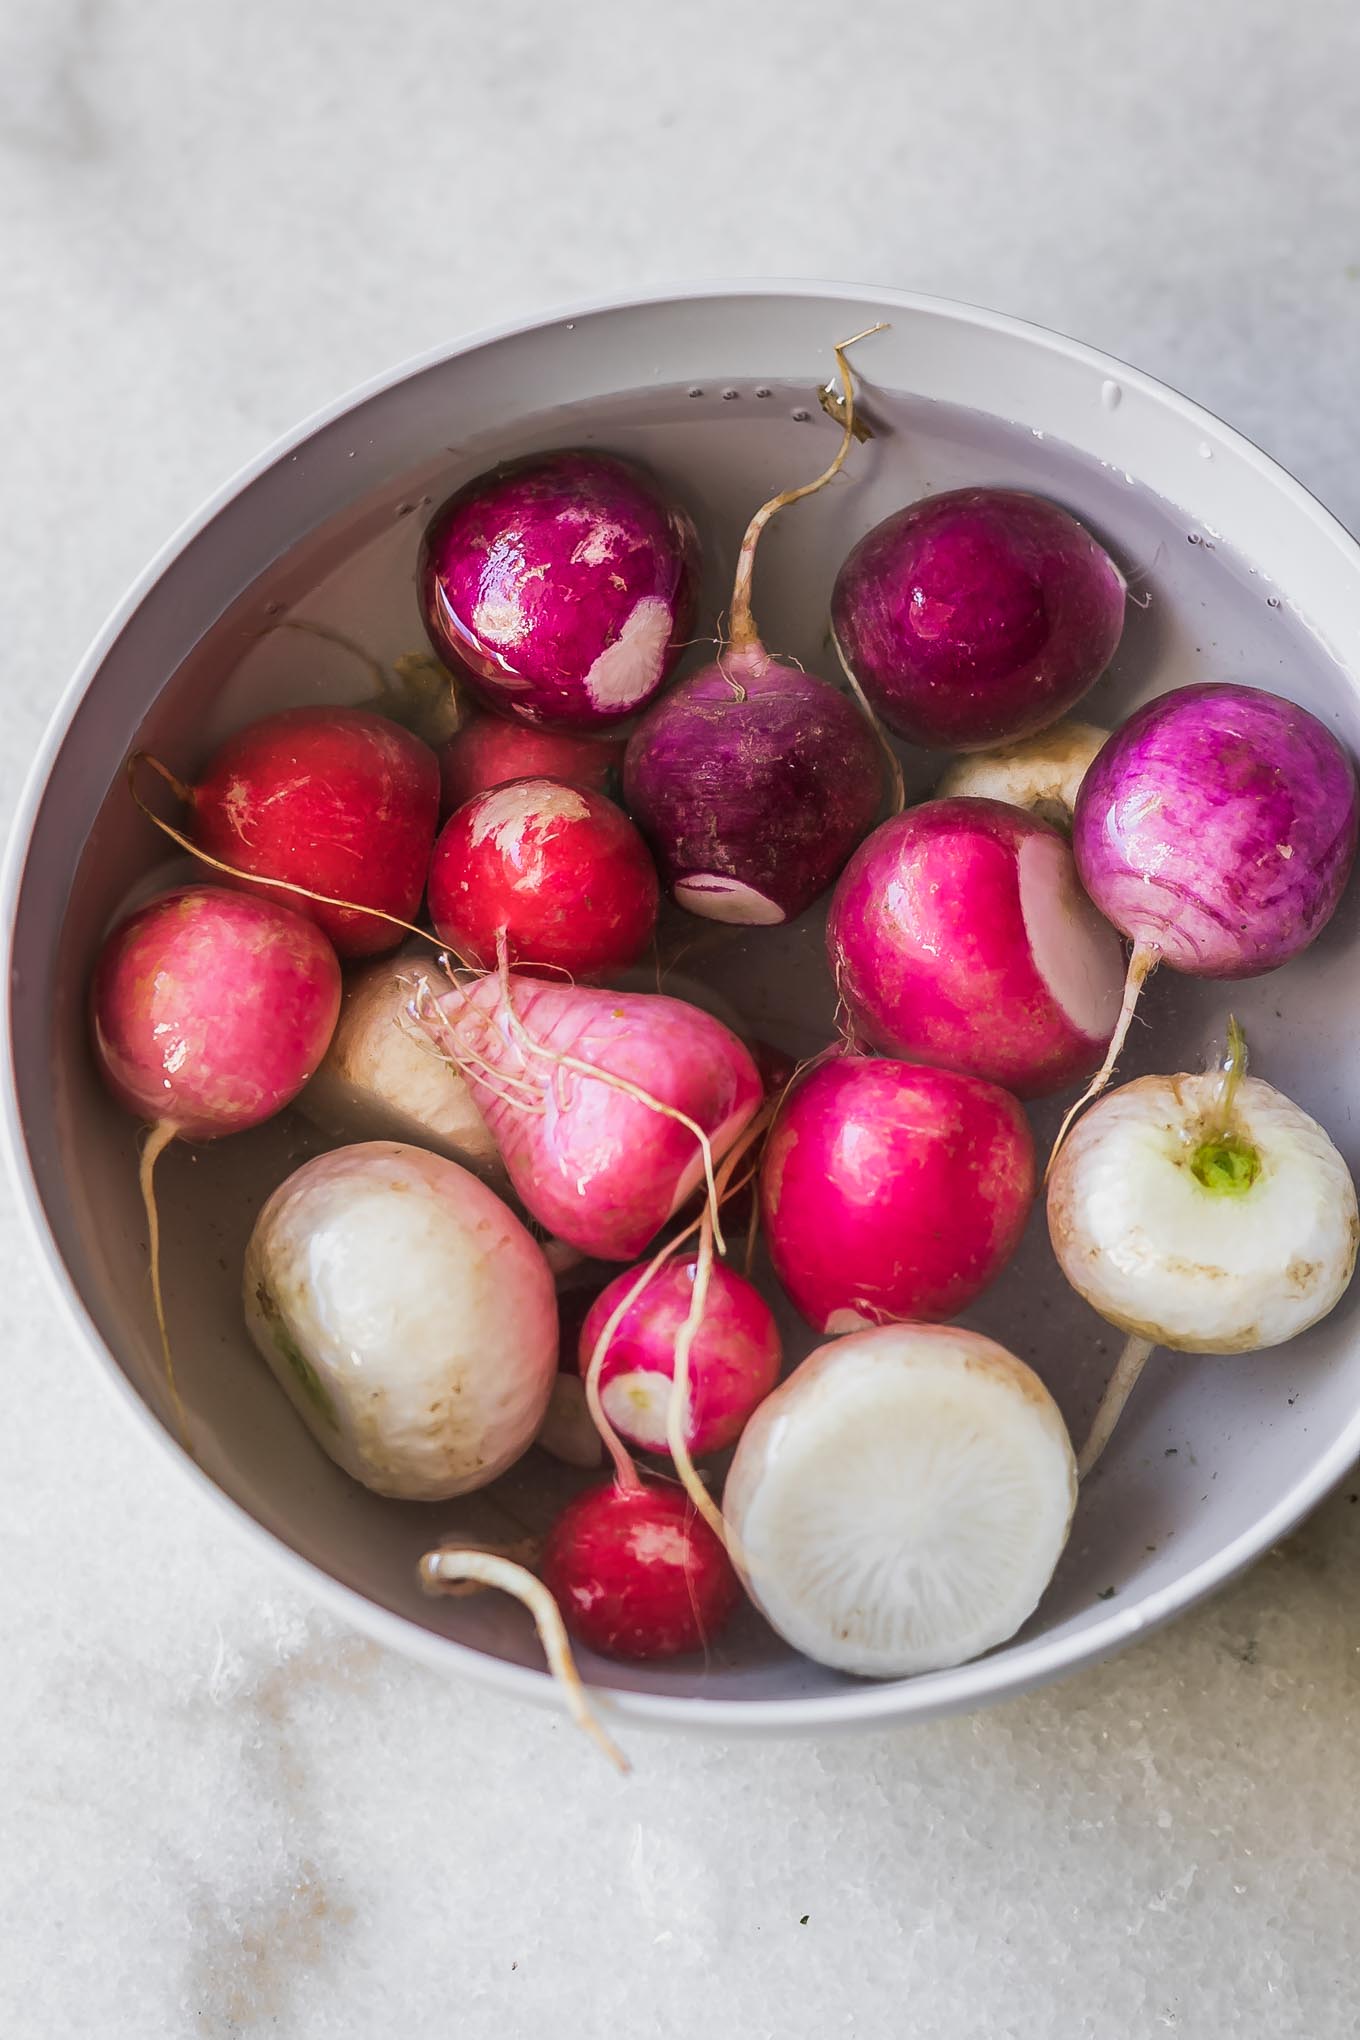 https://www.forkintheroad.co/wp-content/uploads/2022/02/how-to-store-radishes-114.jpg